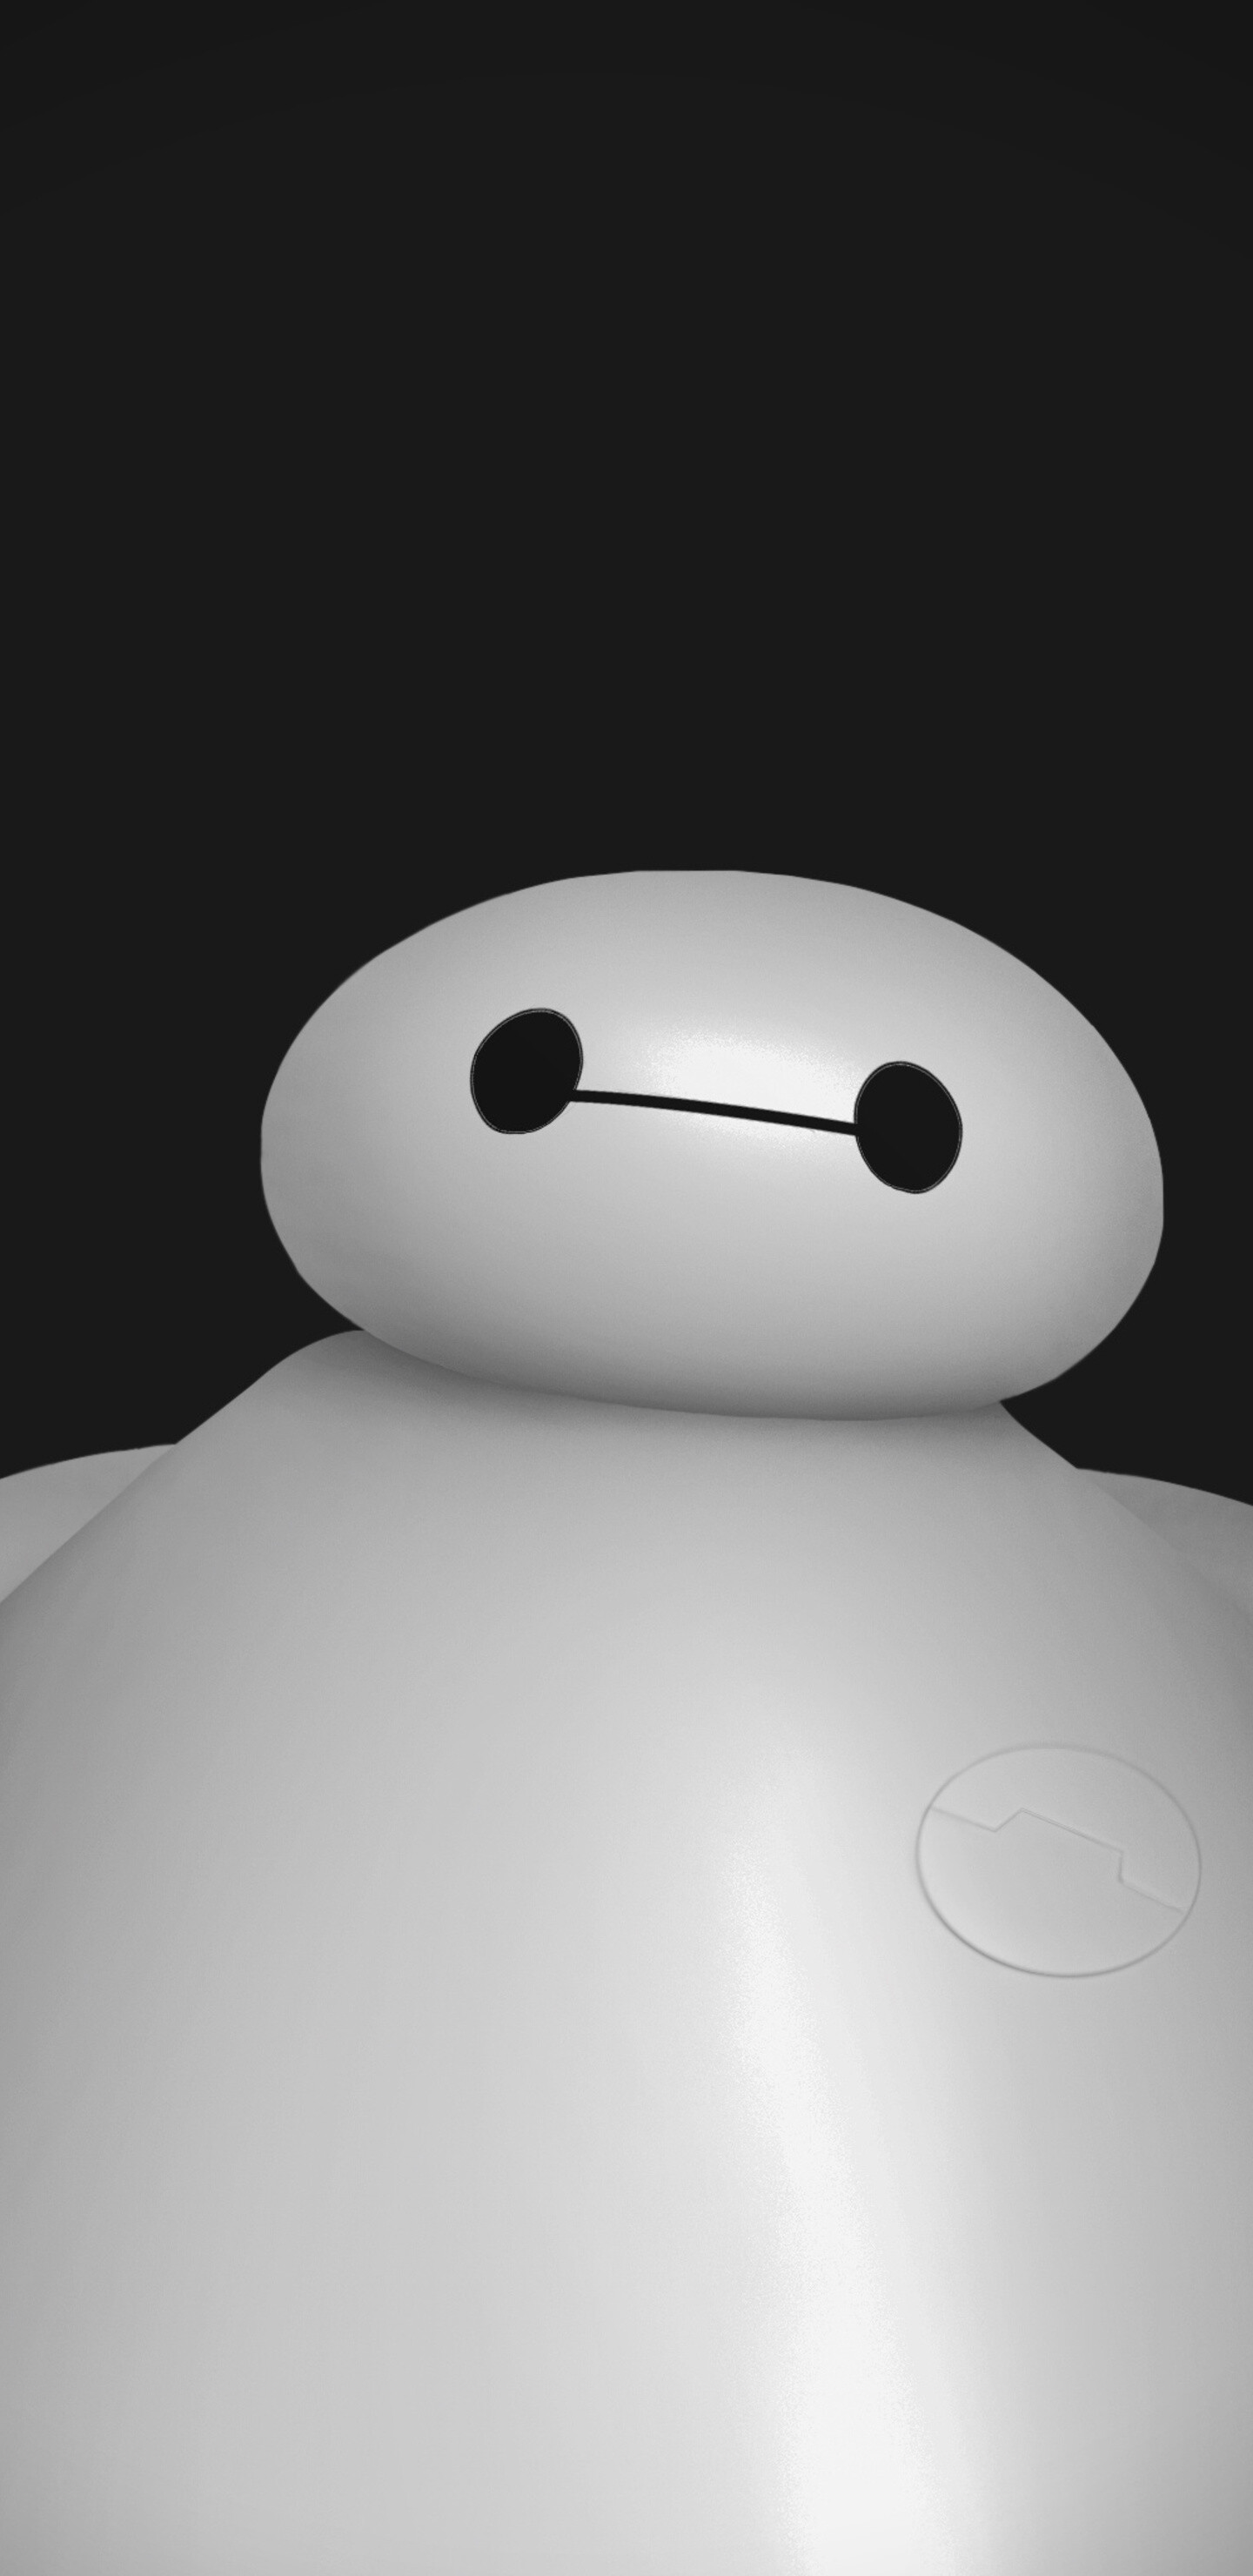 Baymax! (TV Series): Big Hero 6, TV series all episodes of which are written by Cirocco Dunlap. 1440x2960 HD Wallpaper.